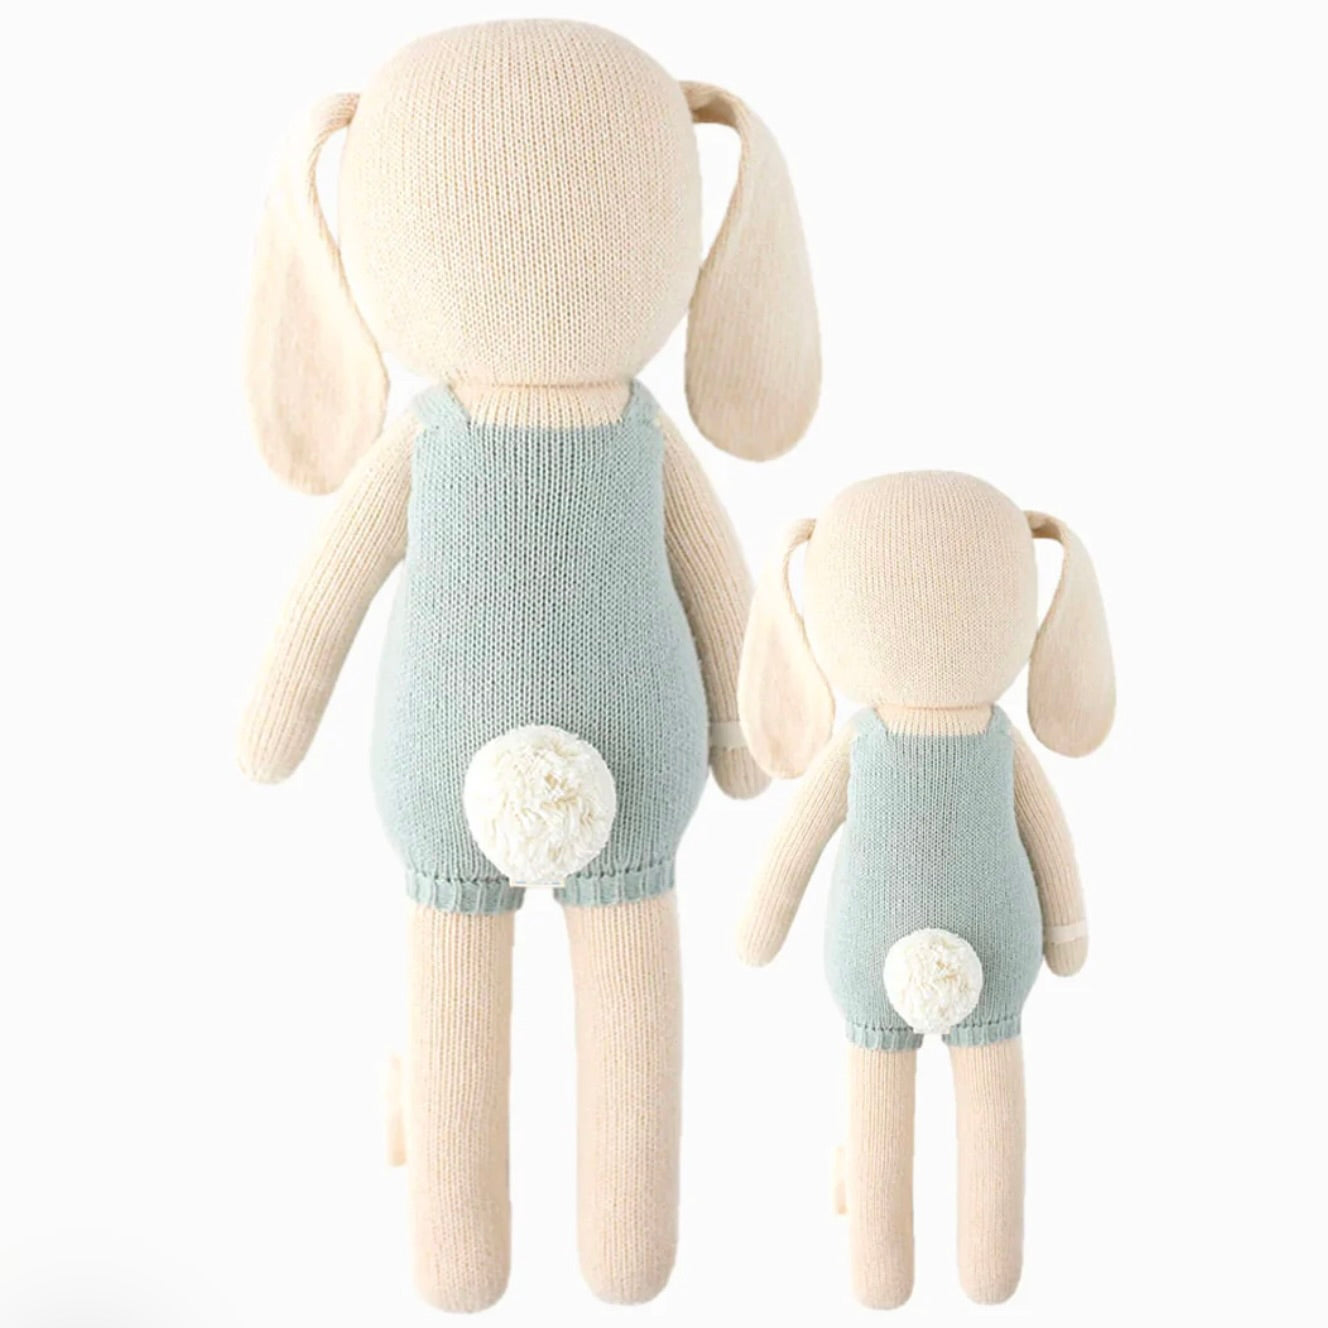 Henry the Bunny by Cuddle + Kind  - 2 sizes